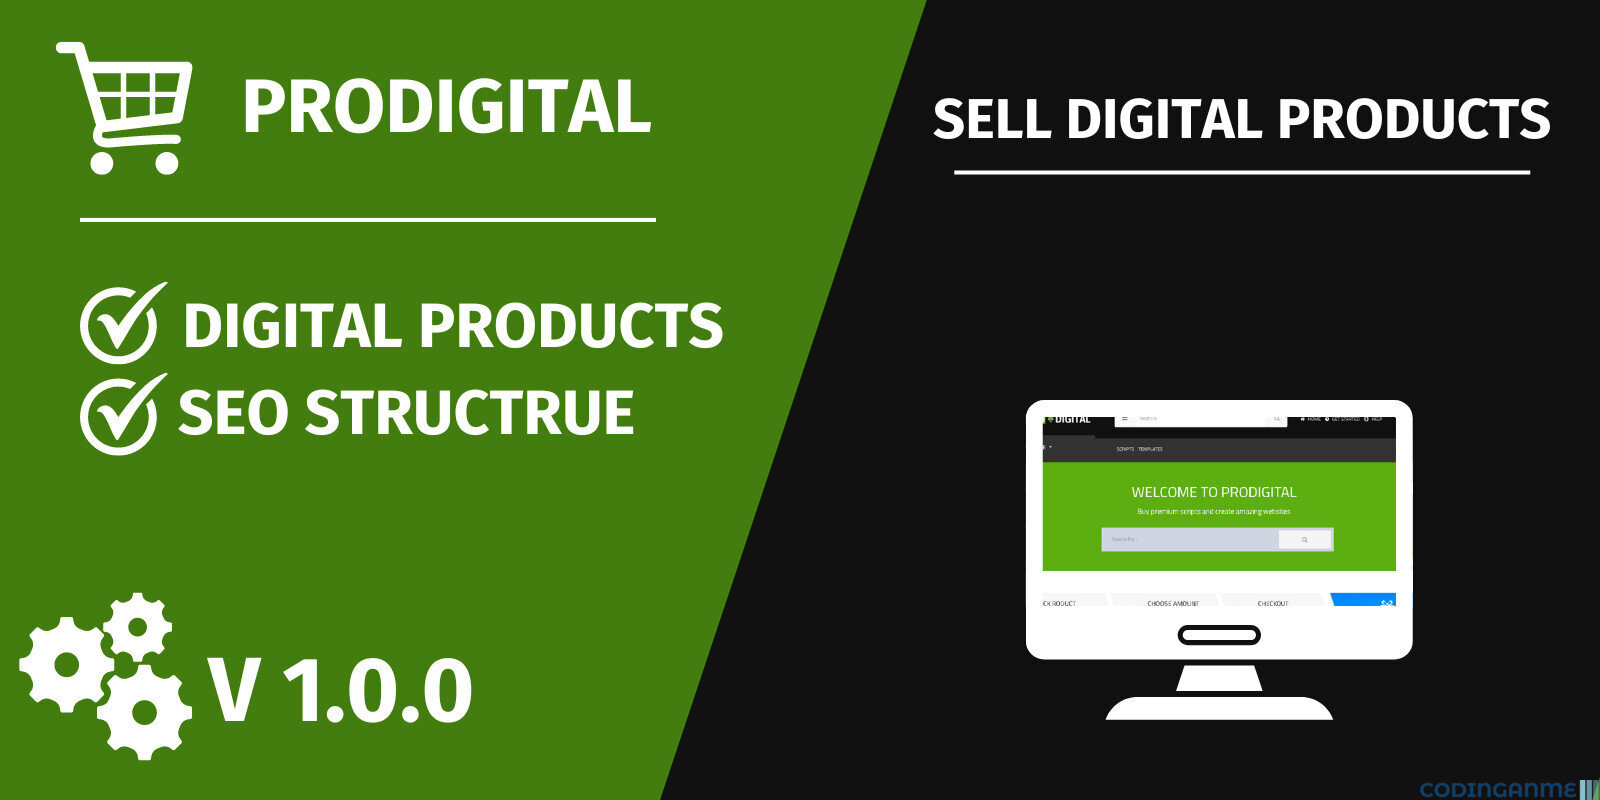 More information about "ProDigital - Digital Products Marketplace Script by Holocode"